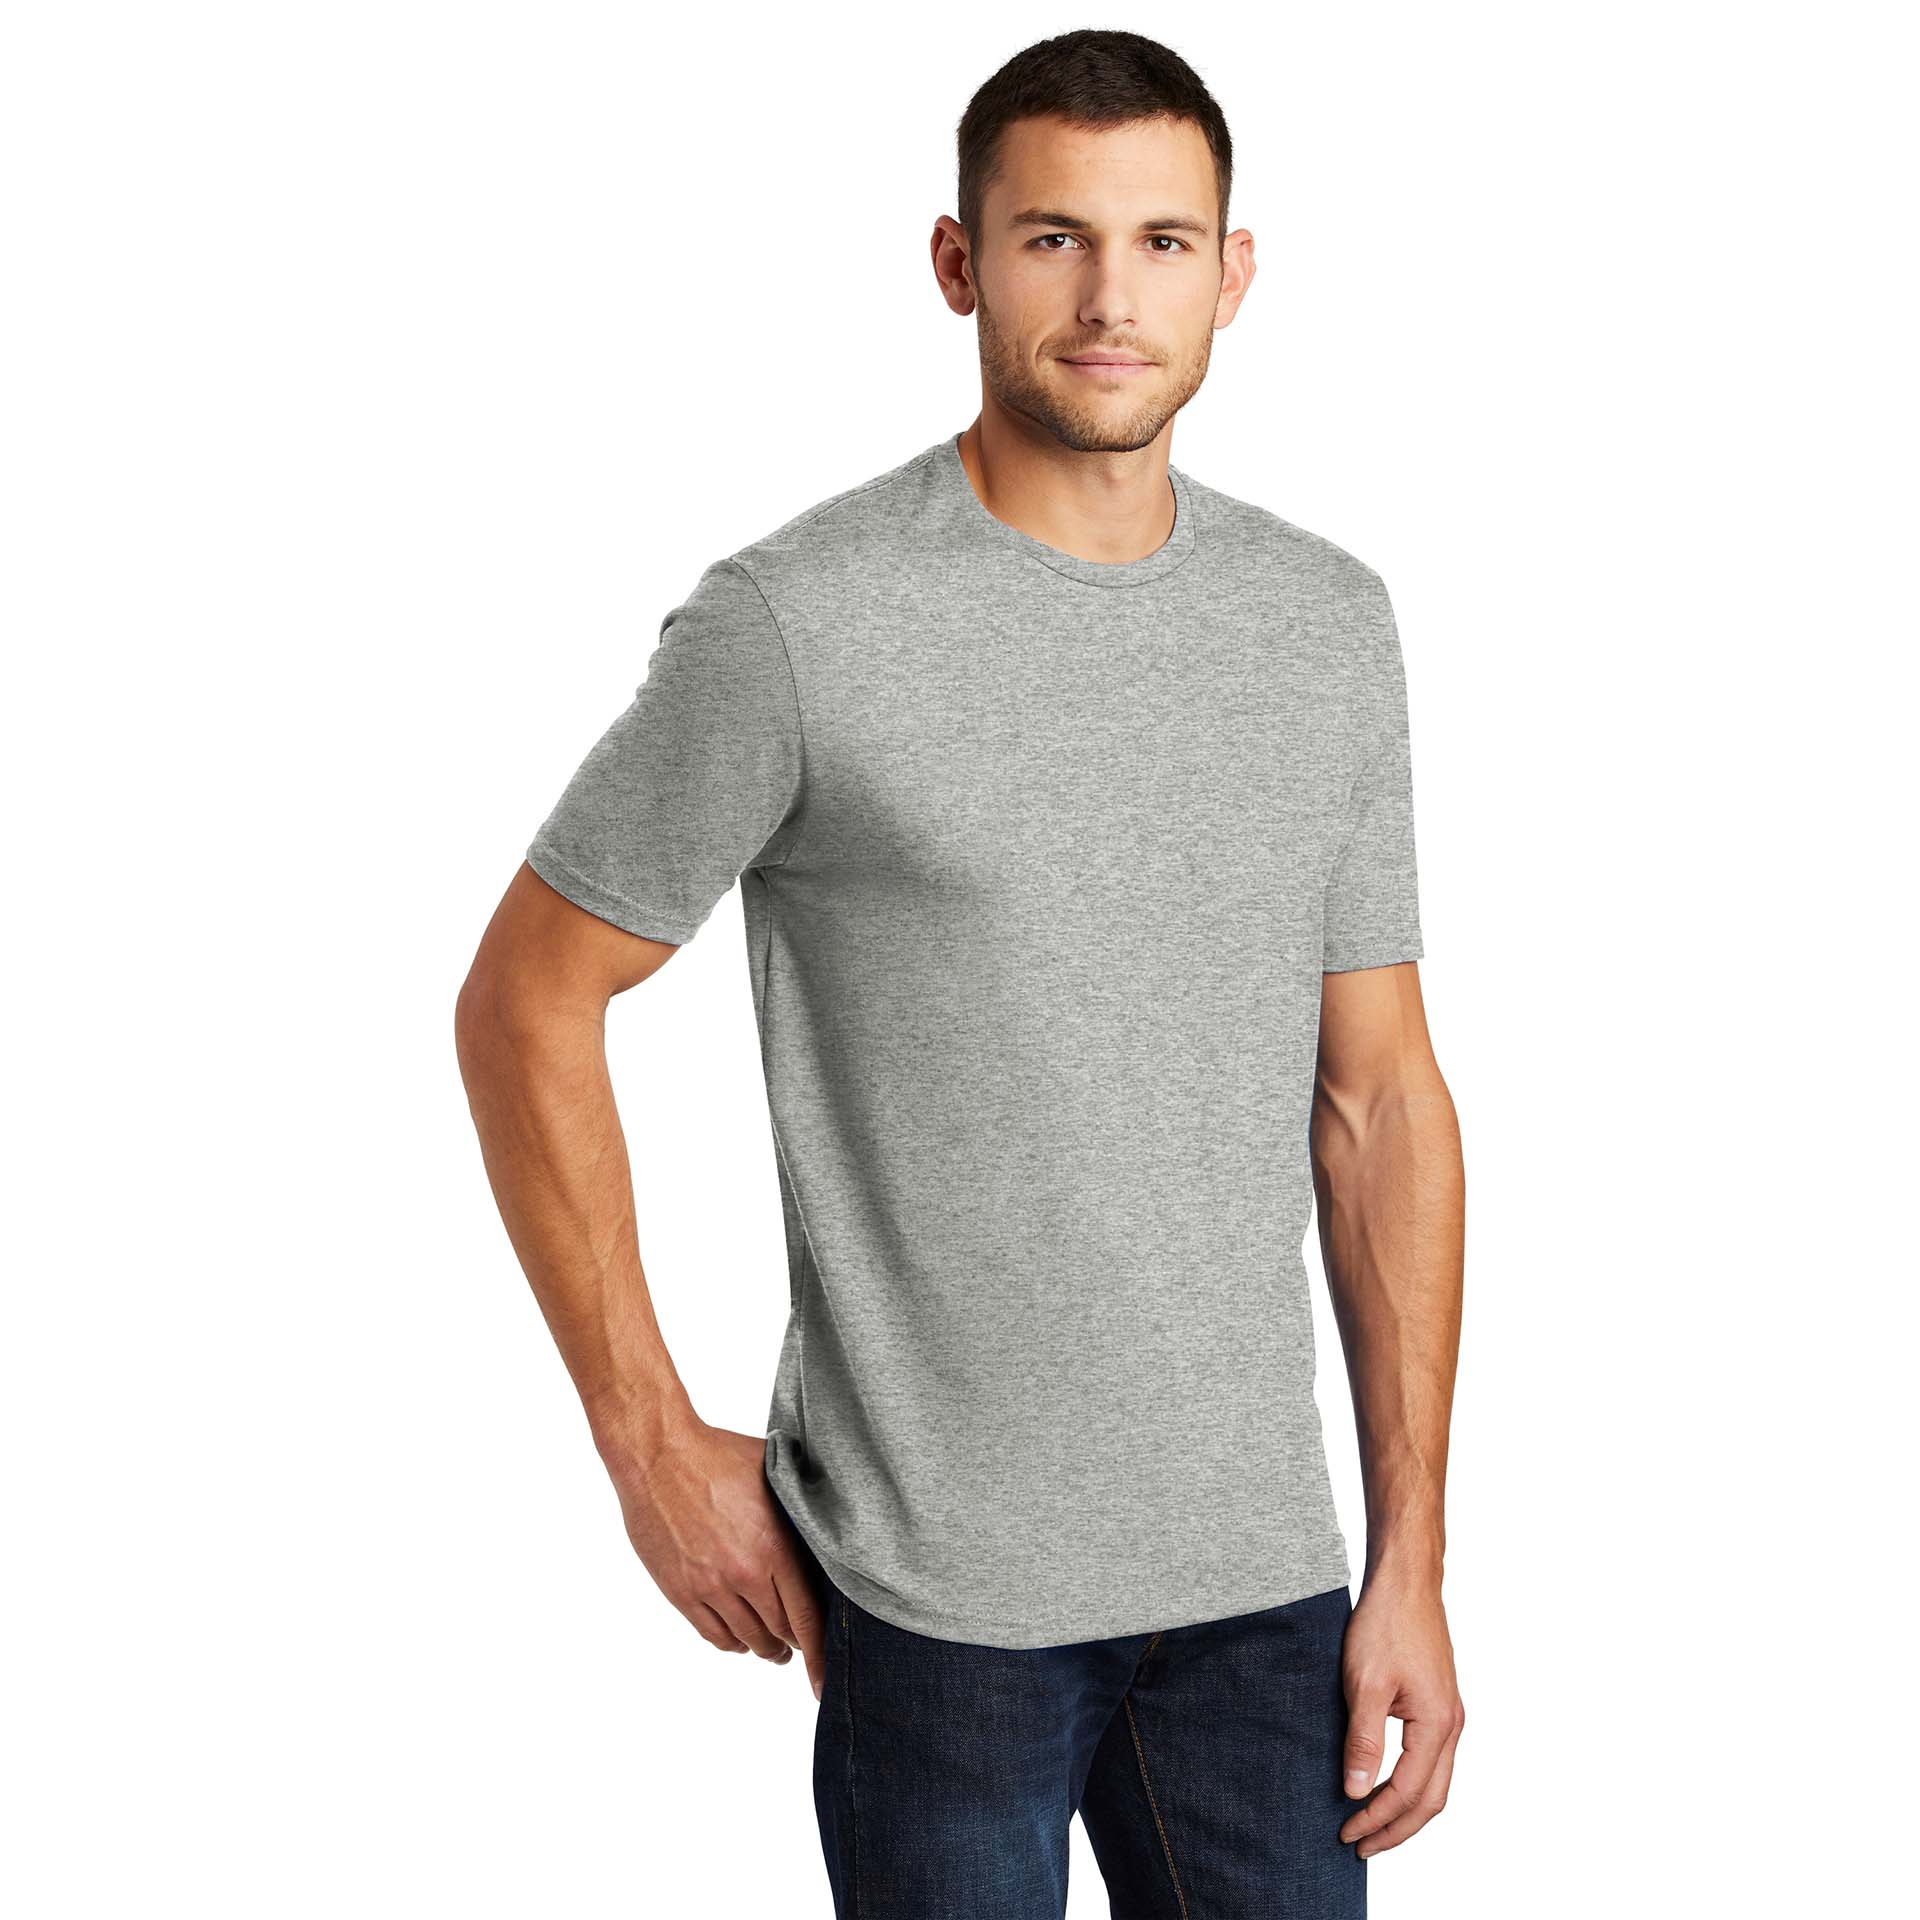 District DT104 Perfect Weight Tee - Heathered Steel | Full Source